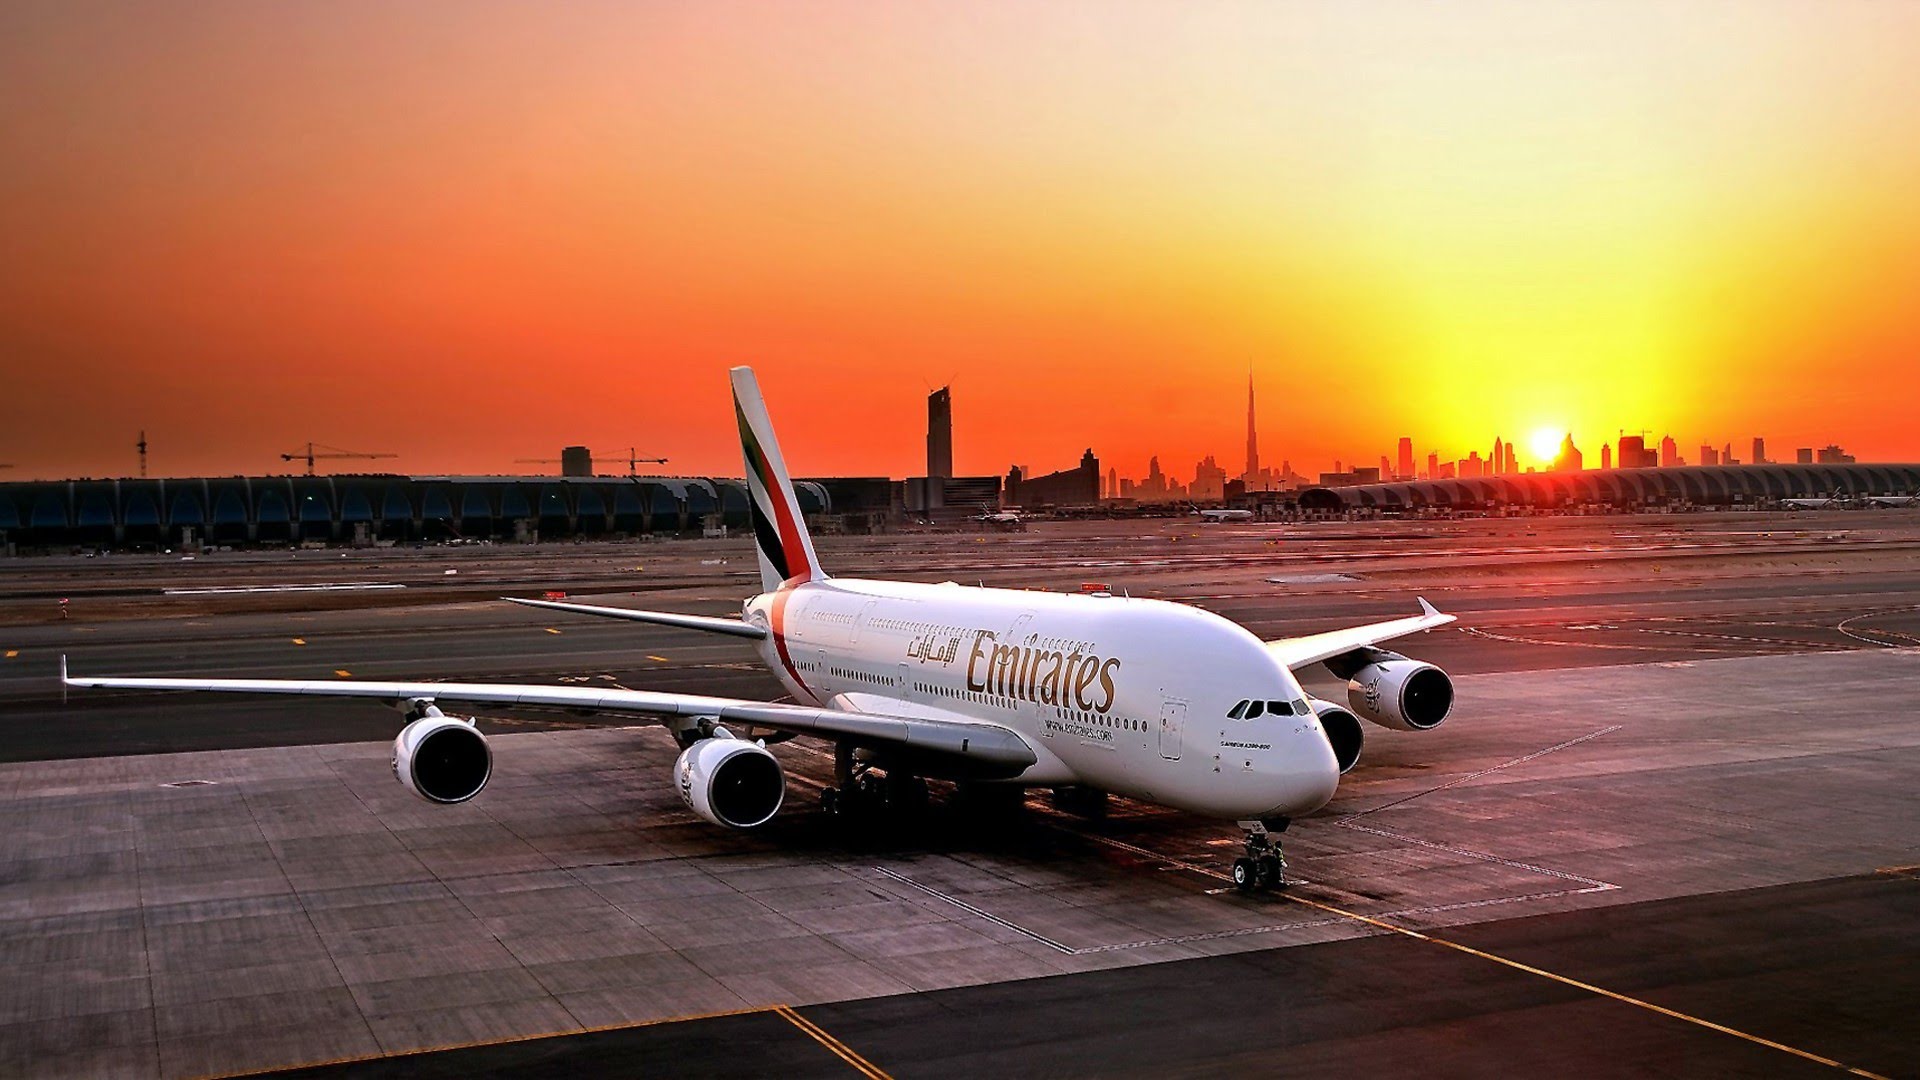 WORLDS TOP 10 AIRLINES OF 2016